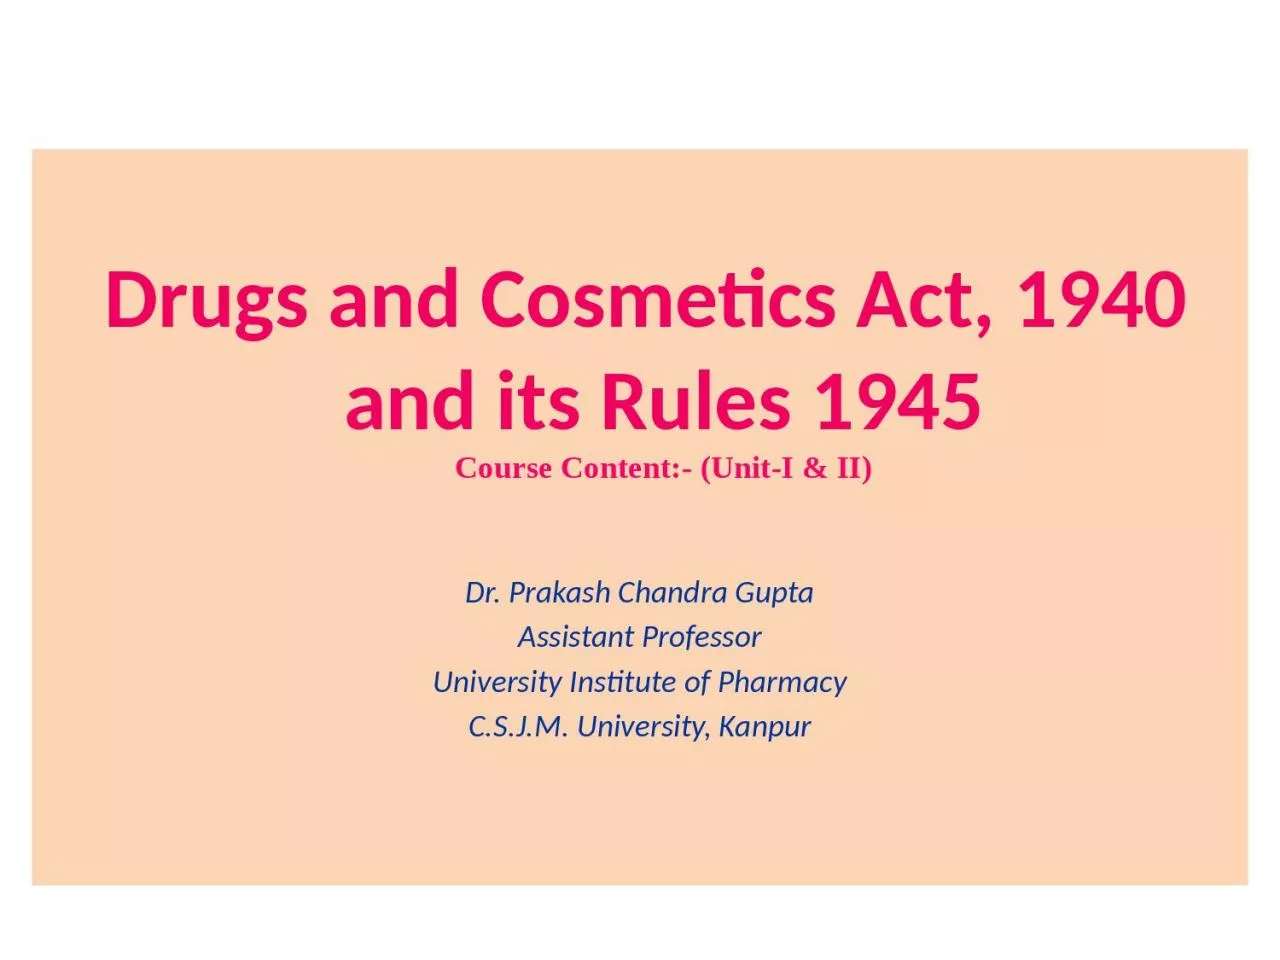 Drugs and Cosmetics Act, 1940 and its Rules 1945